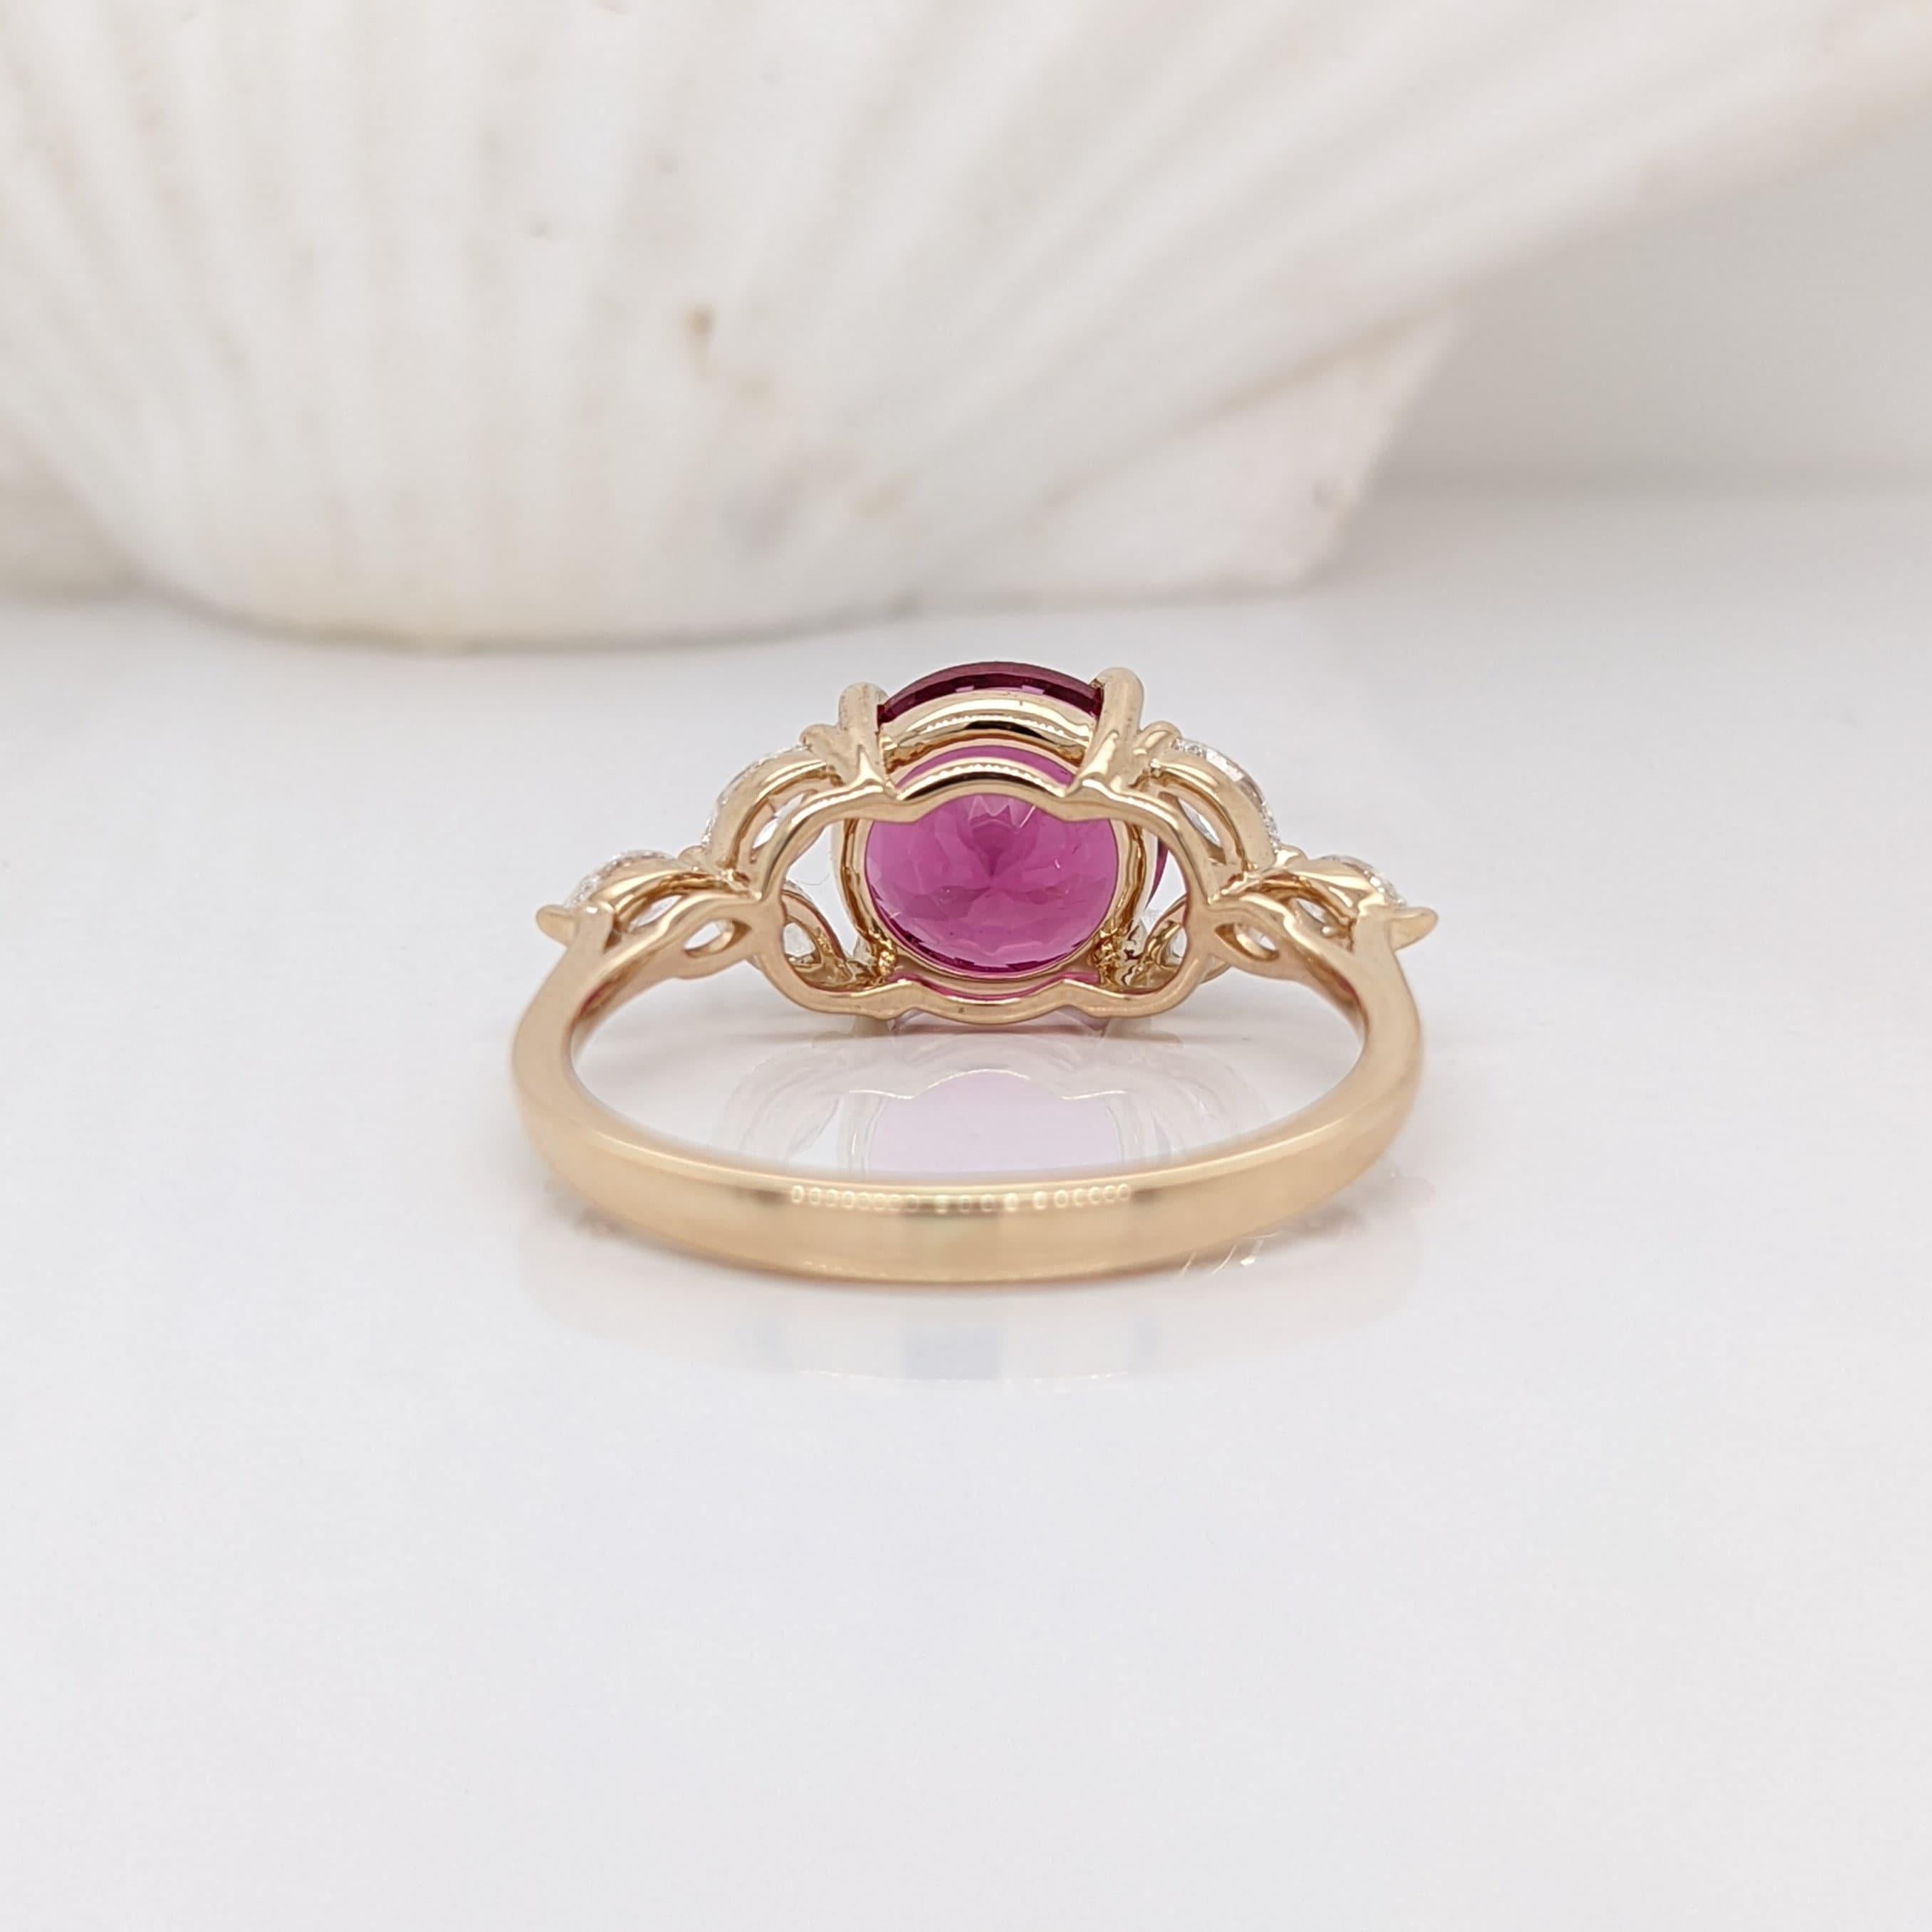 Round Cut 2ct Rubellite Tourmaline Ring w Earth Mined Diamonds in Solid 14k Gold Round 8mm For Sale